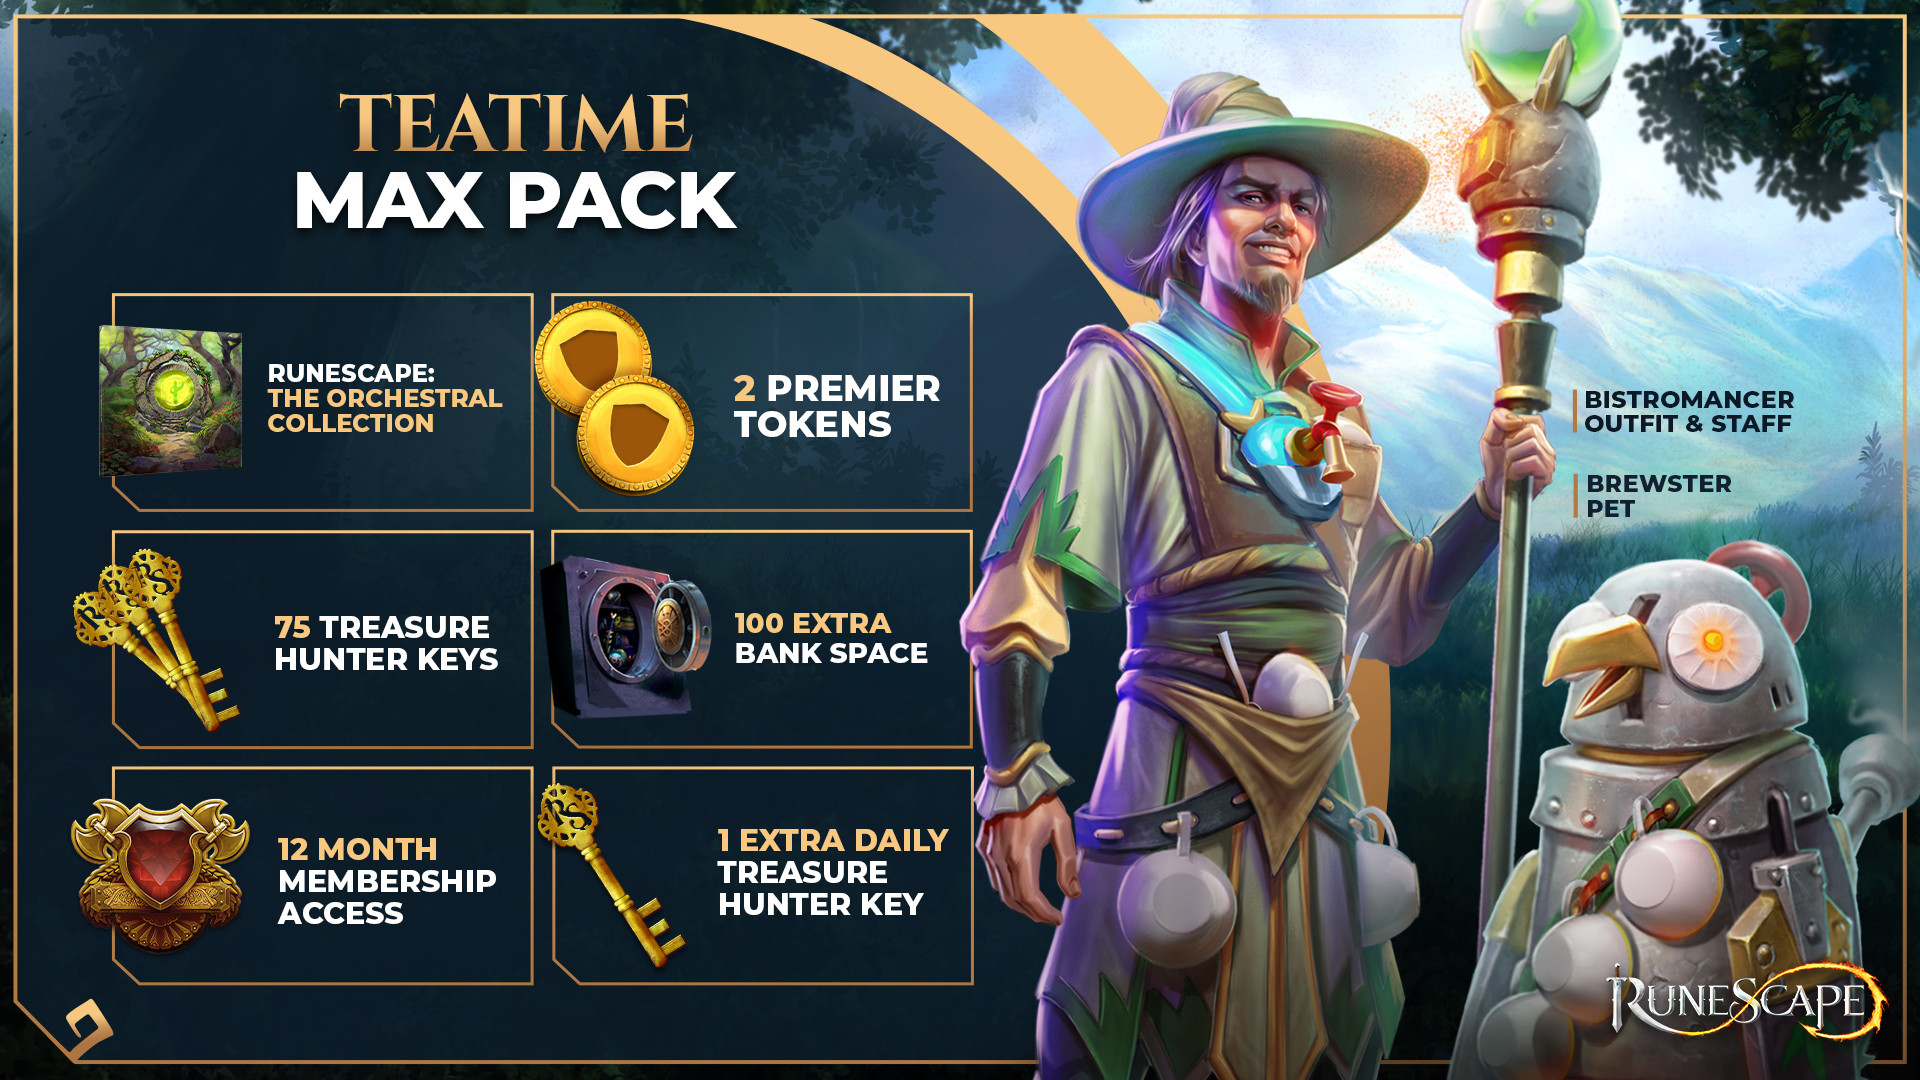 Runescape - Max Pack + 12 Months Membership Manual Delivery, $56.49